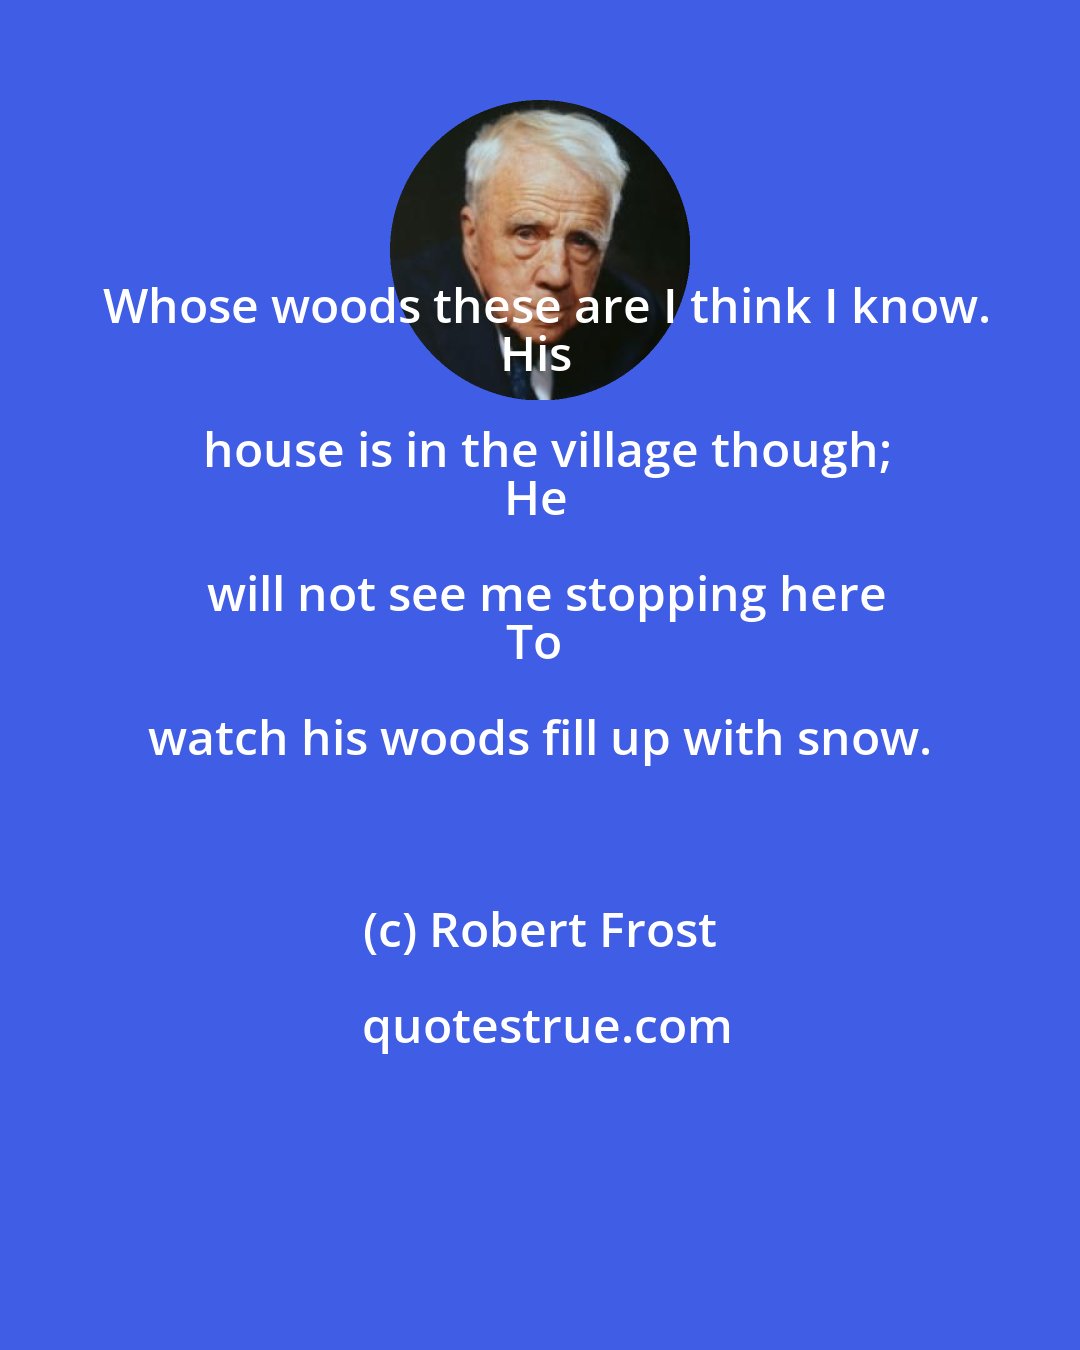 Robert Frost: Whose woods these are I think I know.
His house is in the village though;
He will not see me stopping here
To watch his woods fill up with snow.